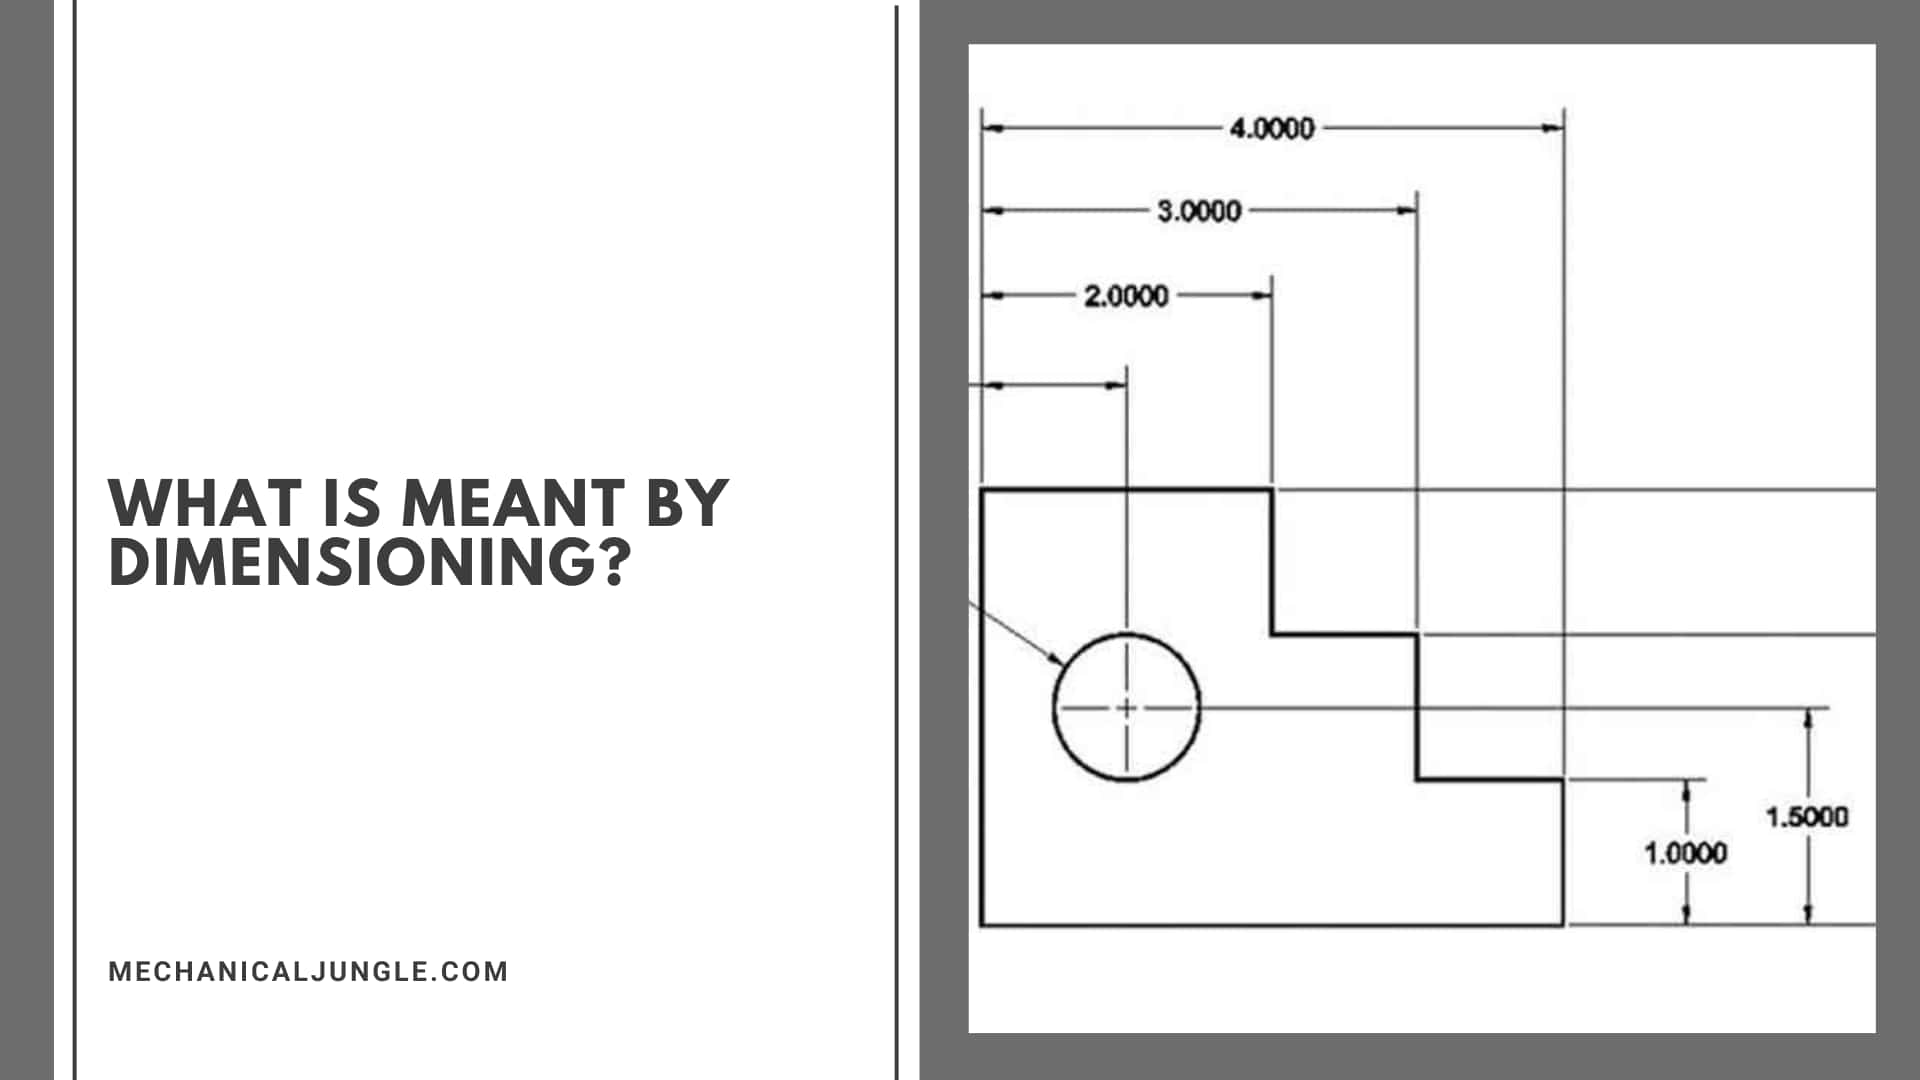 What Is Meant by Dimensioning?